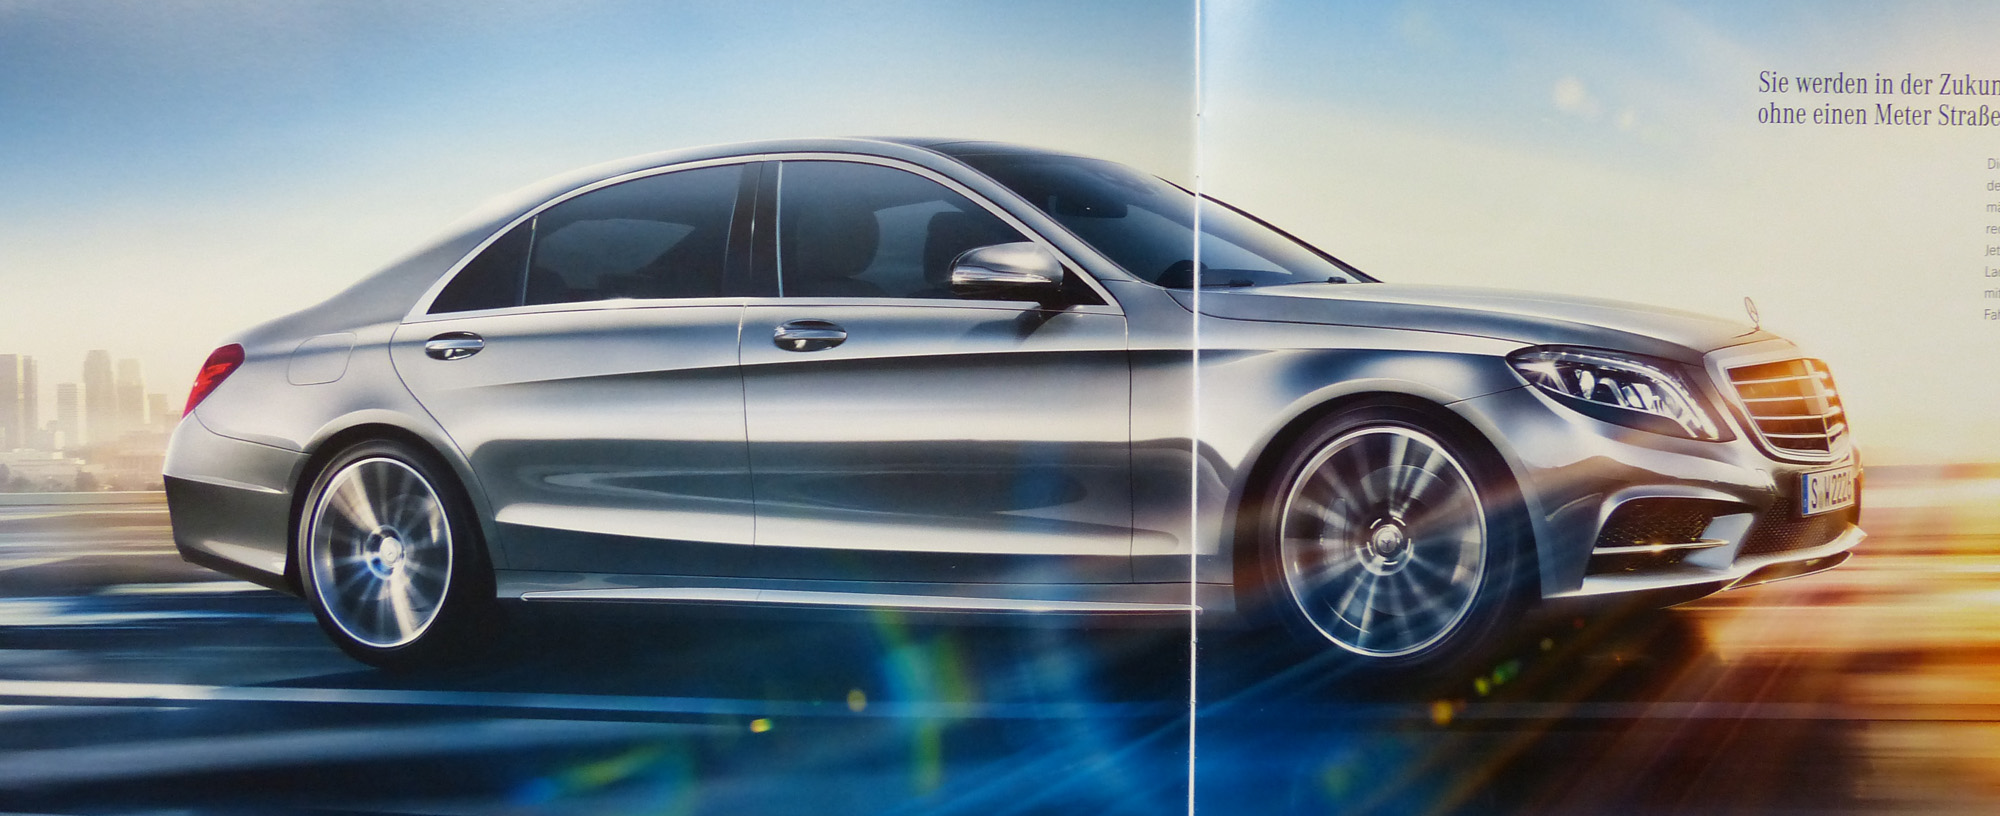 > 2014 MB S class pics leaked|unveiling tomorrow - Photo posted in Whipz 'n Stereos (vehicles, sound systems) | Sign in and leave a comment below!